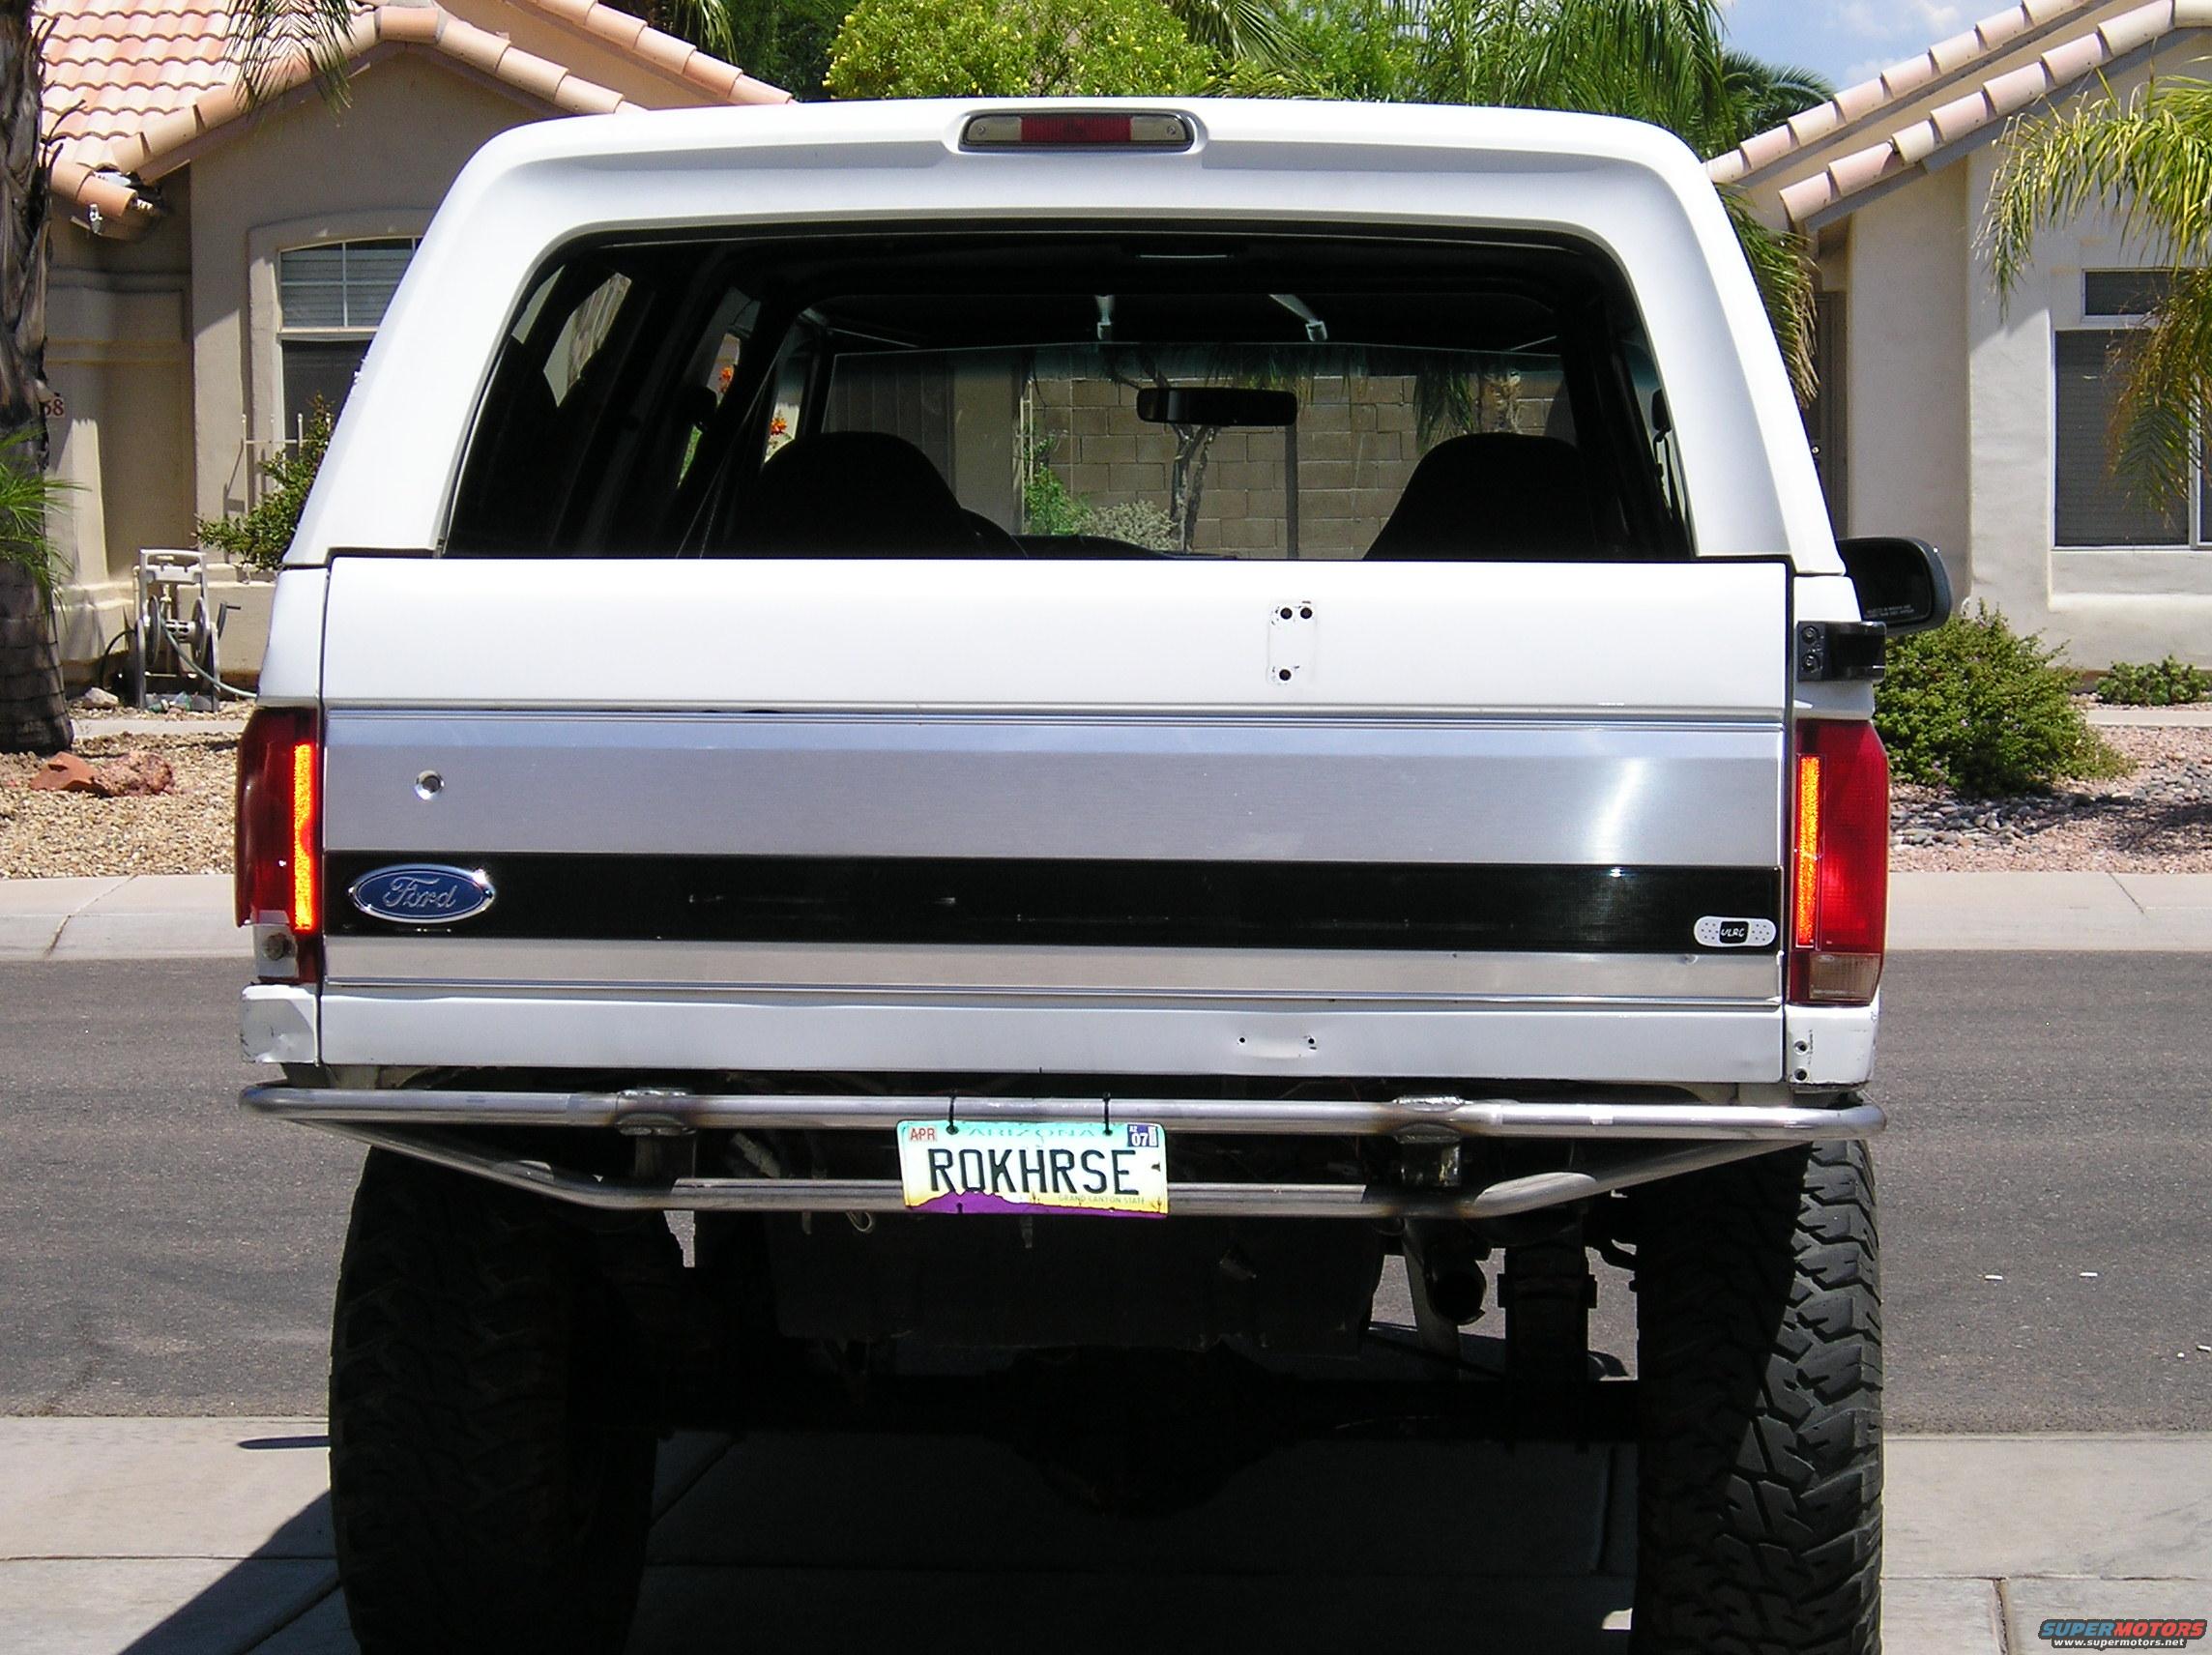 Ford bronco prerunner bumpers #3